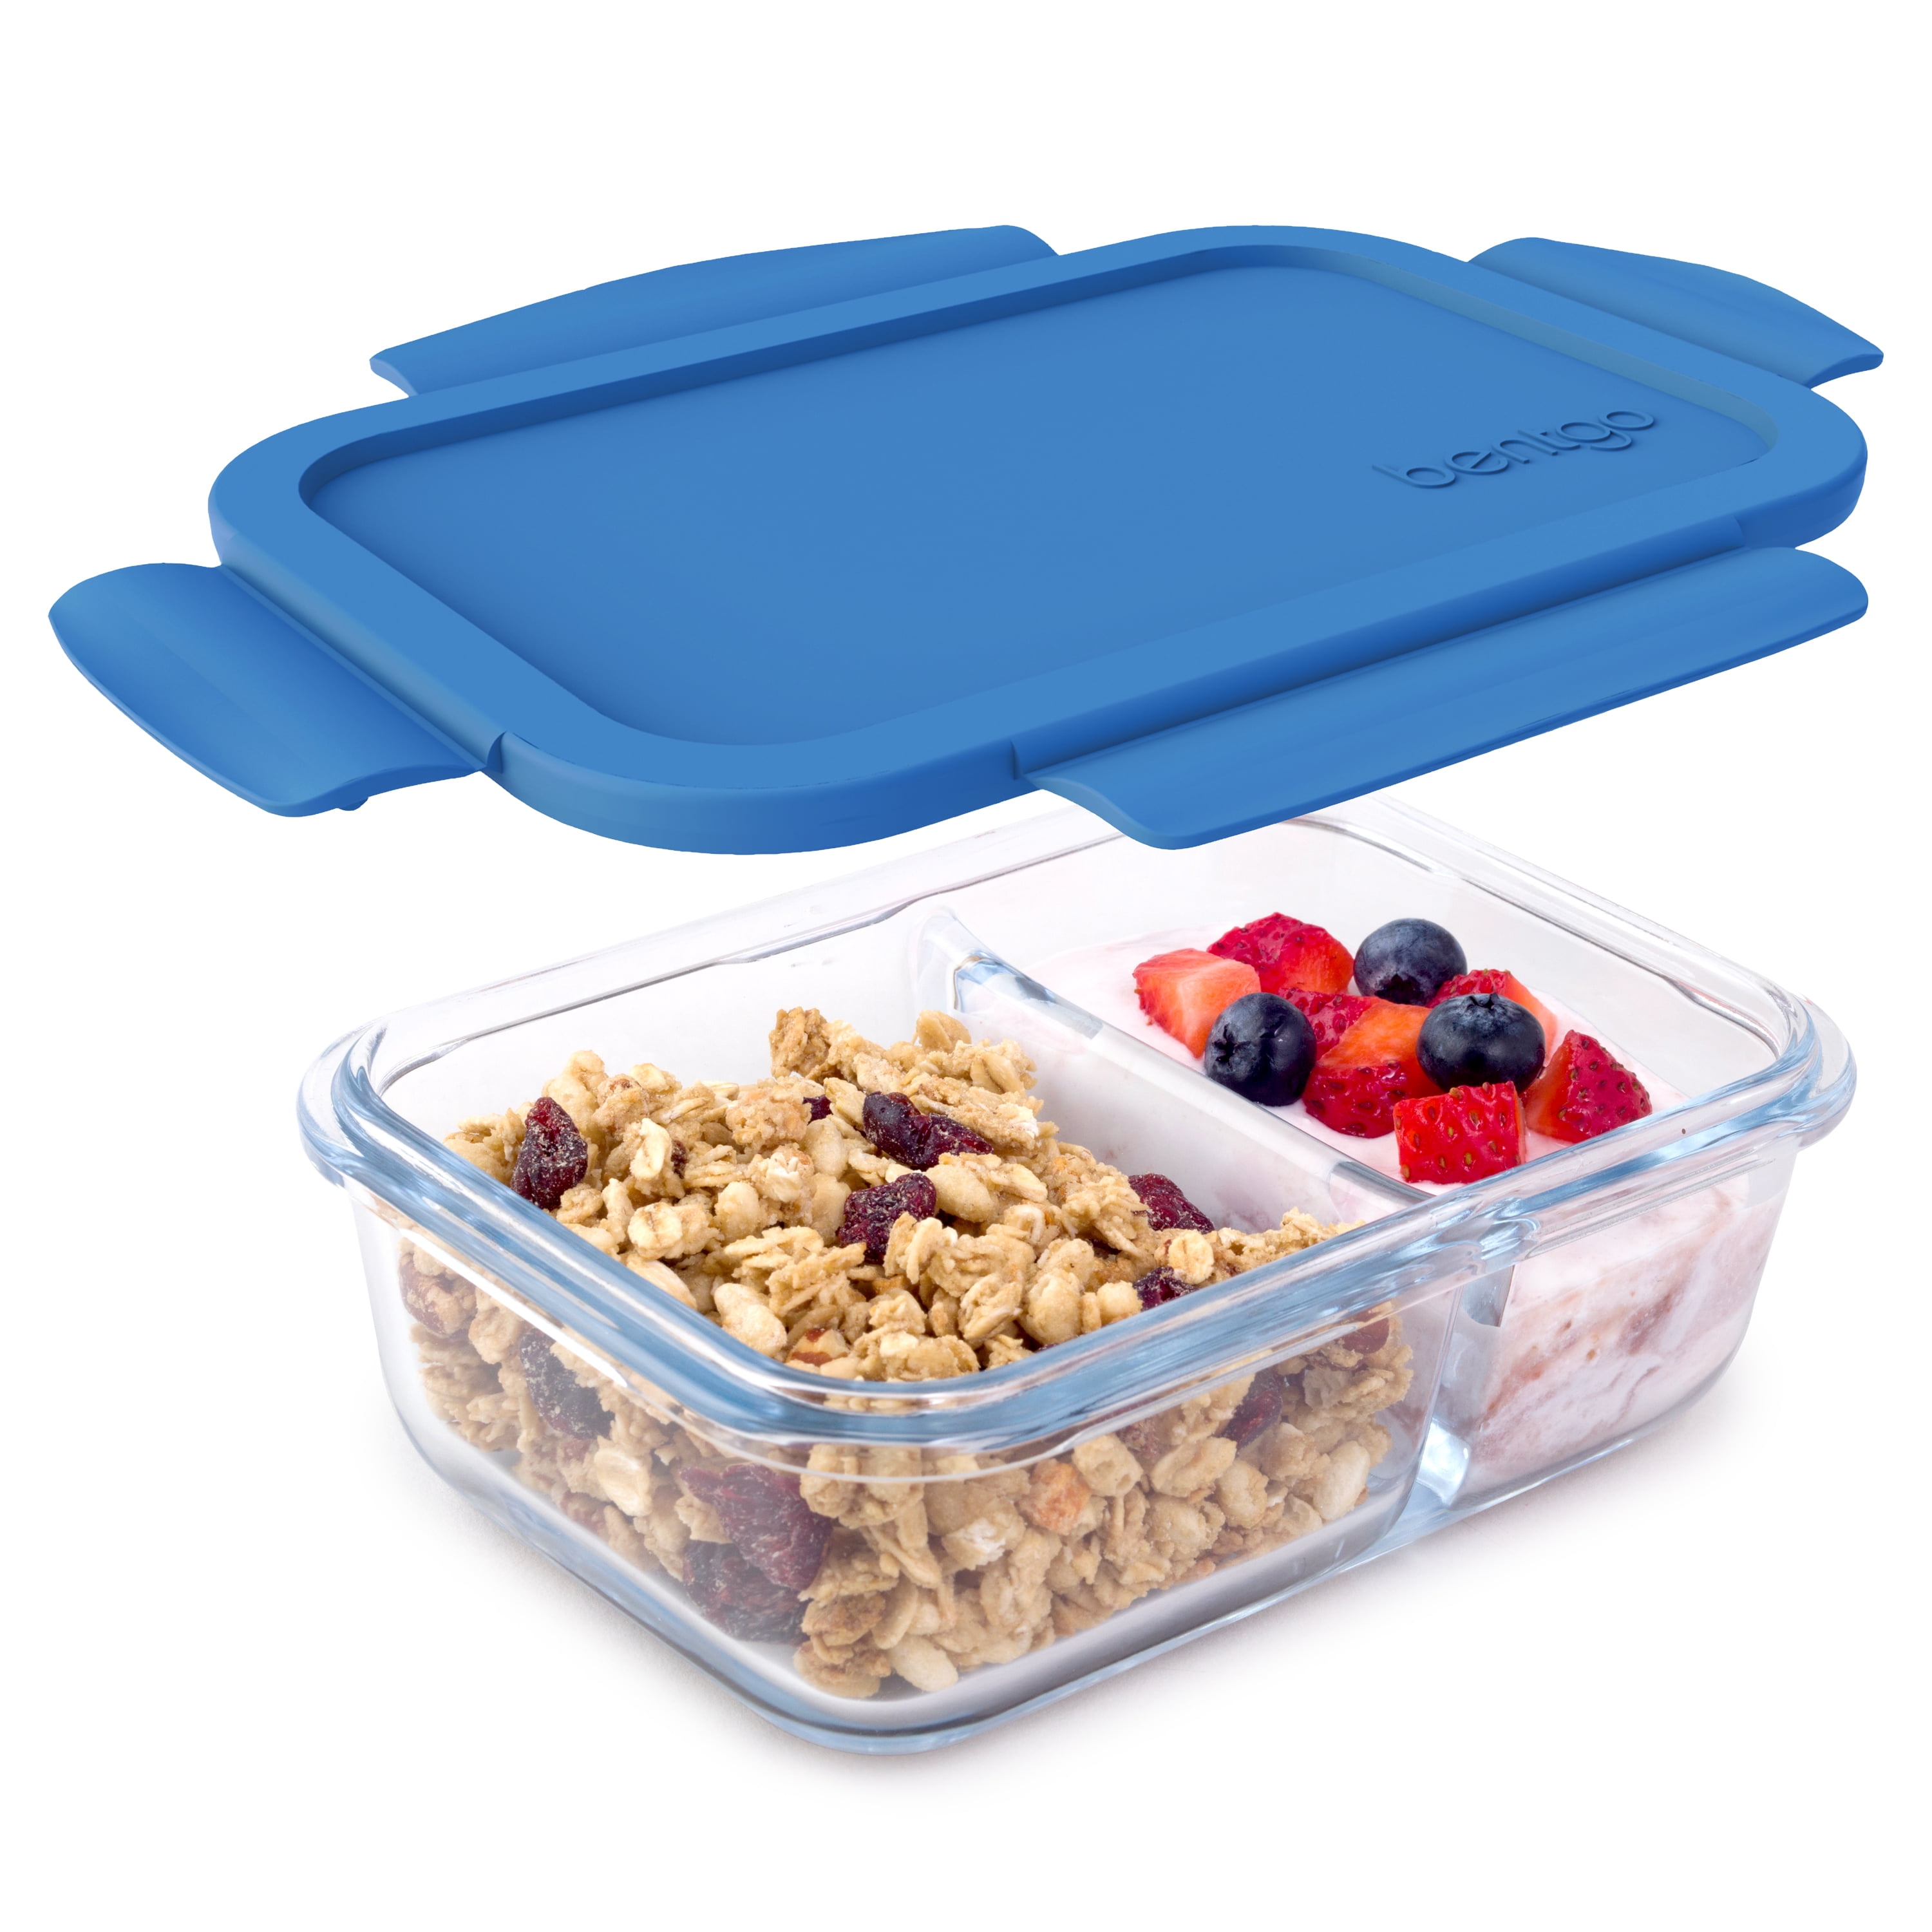 Bentgo Glass Leak-Proof Salad Container Review